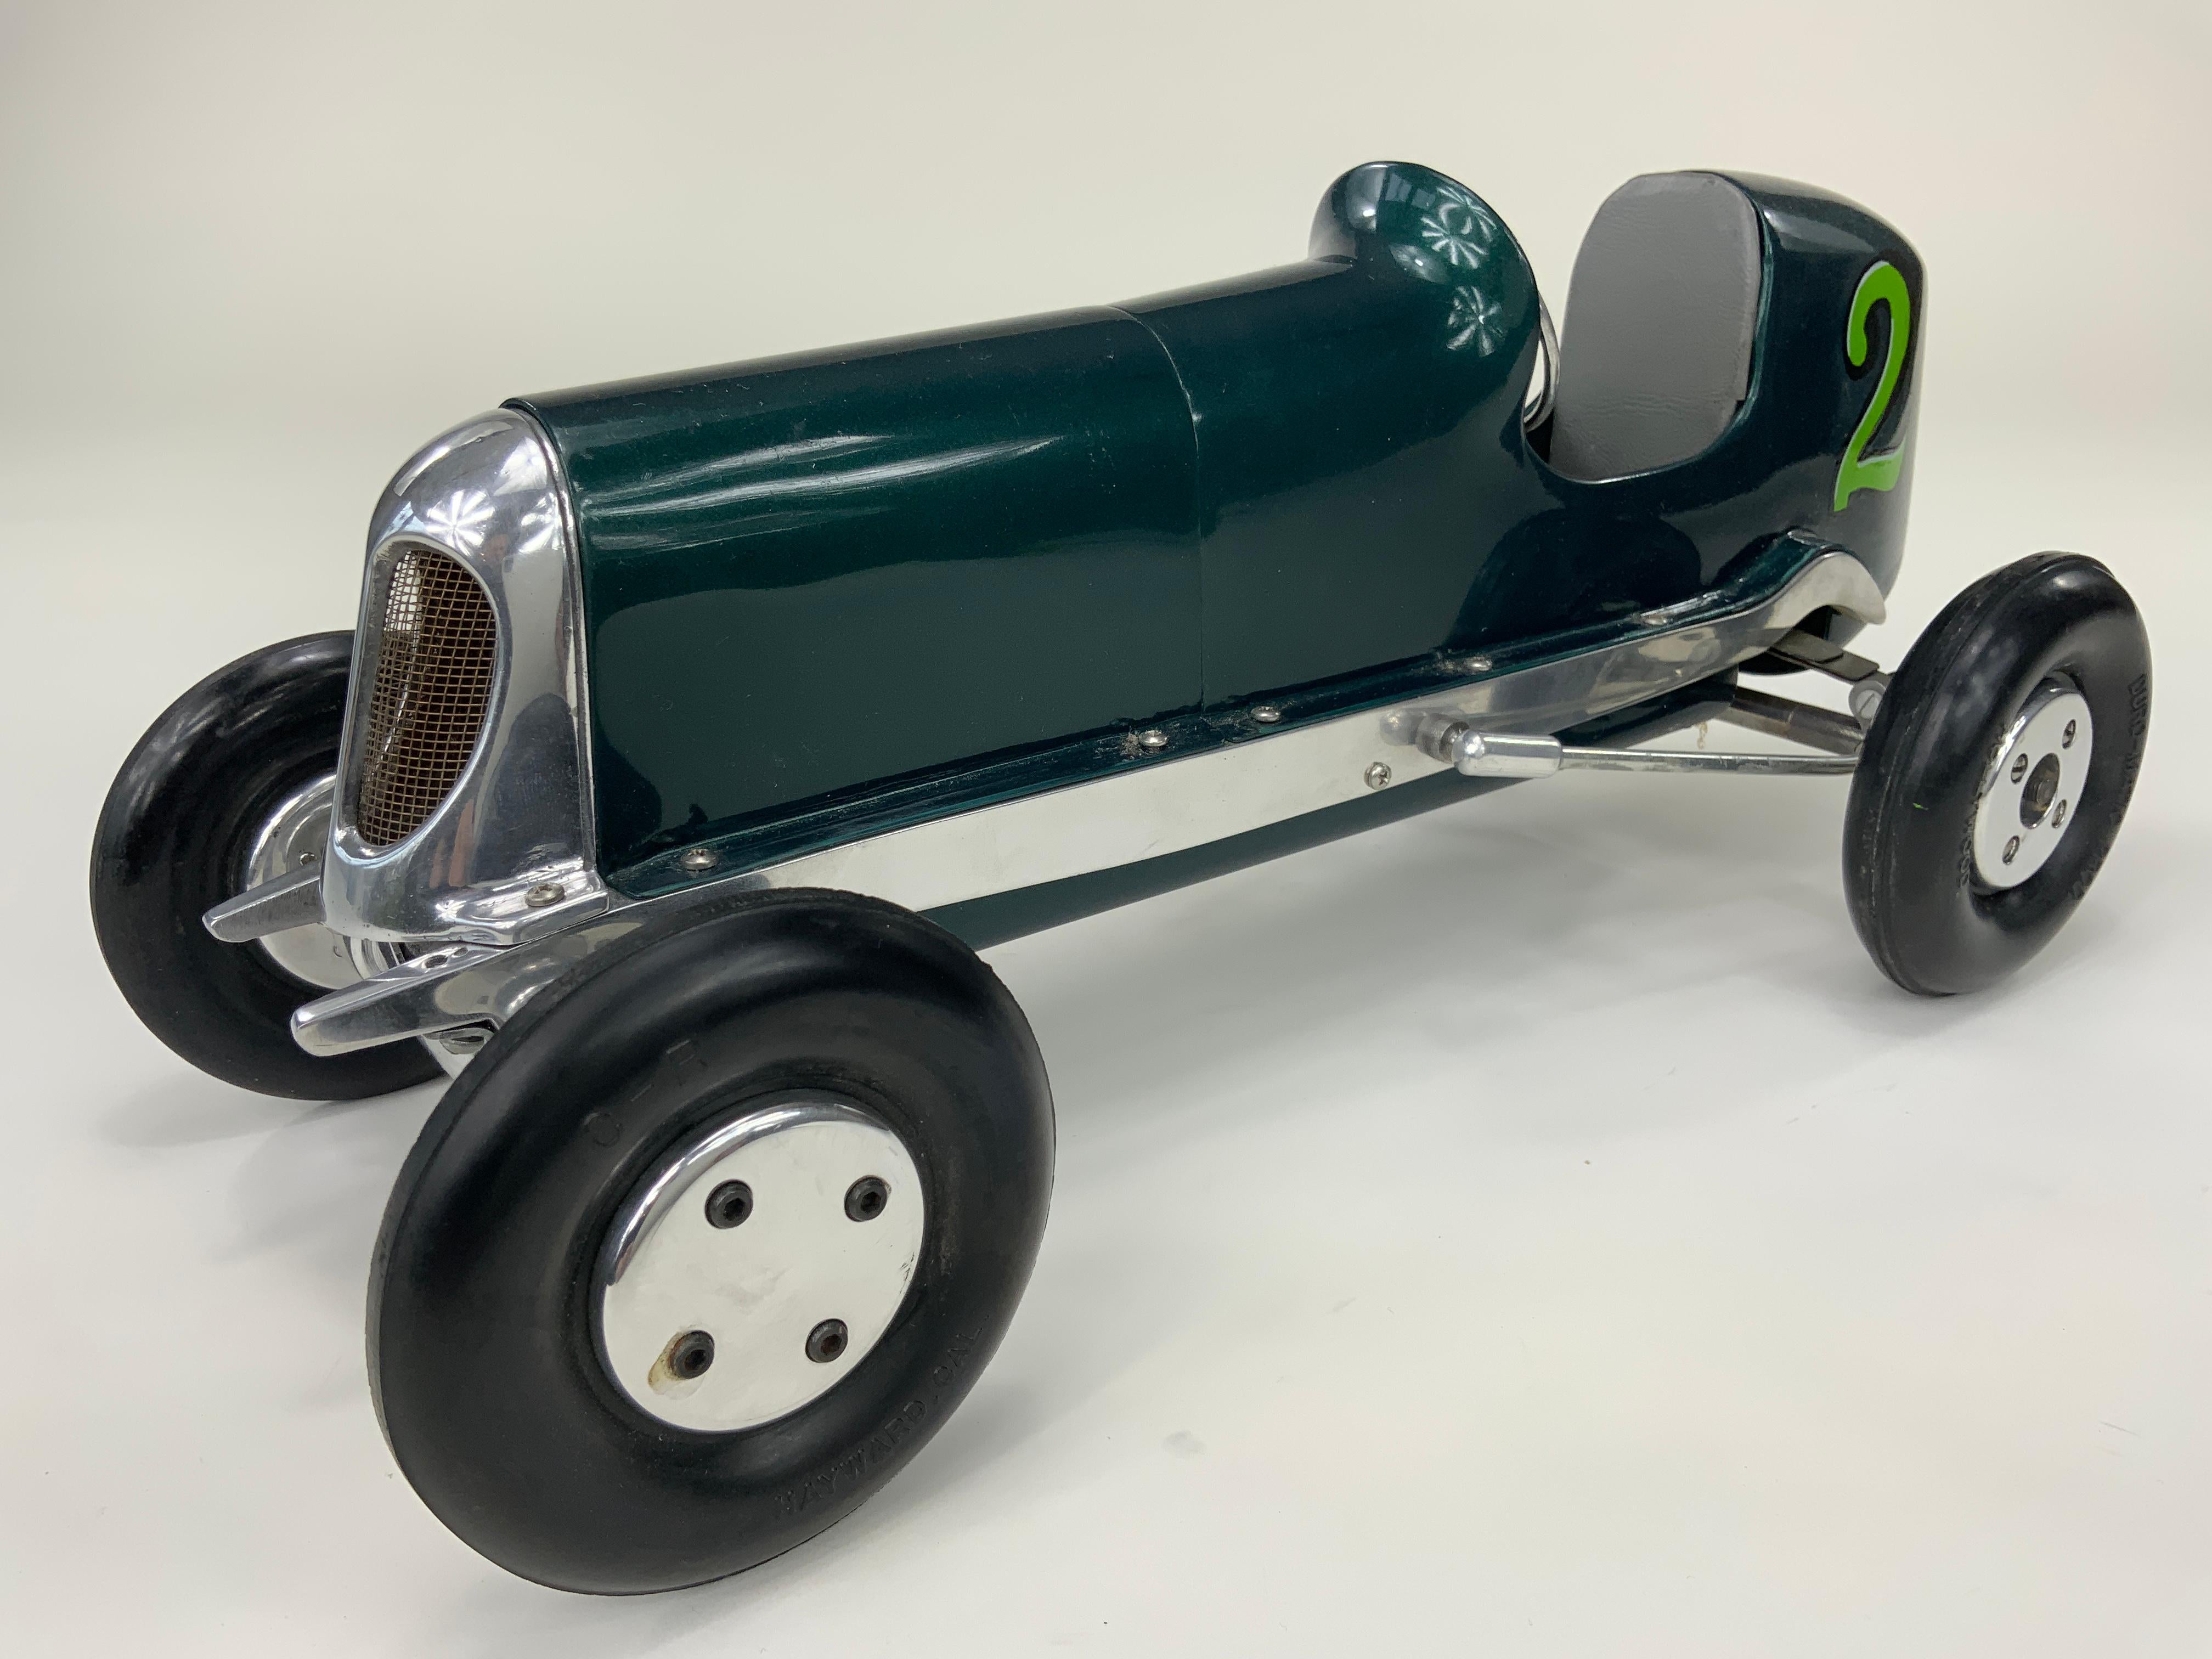 This is a Dooling Mercury First Series tether car built in 1939 by the Dooling brothers, Tom, Russell and Harris.  They began building racers in 1937 for their own pleasure.  These early crude, buggy-type creations, powered by model airplane motors,